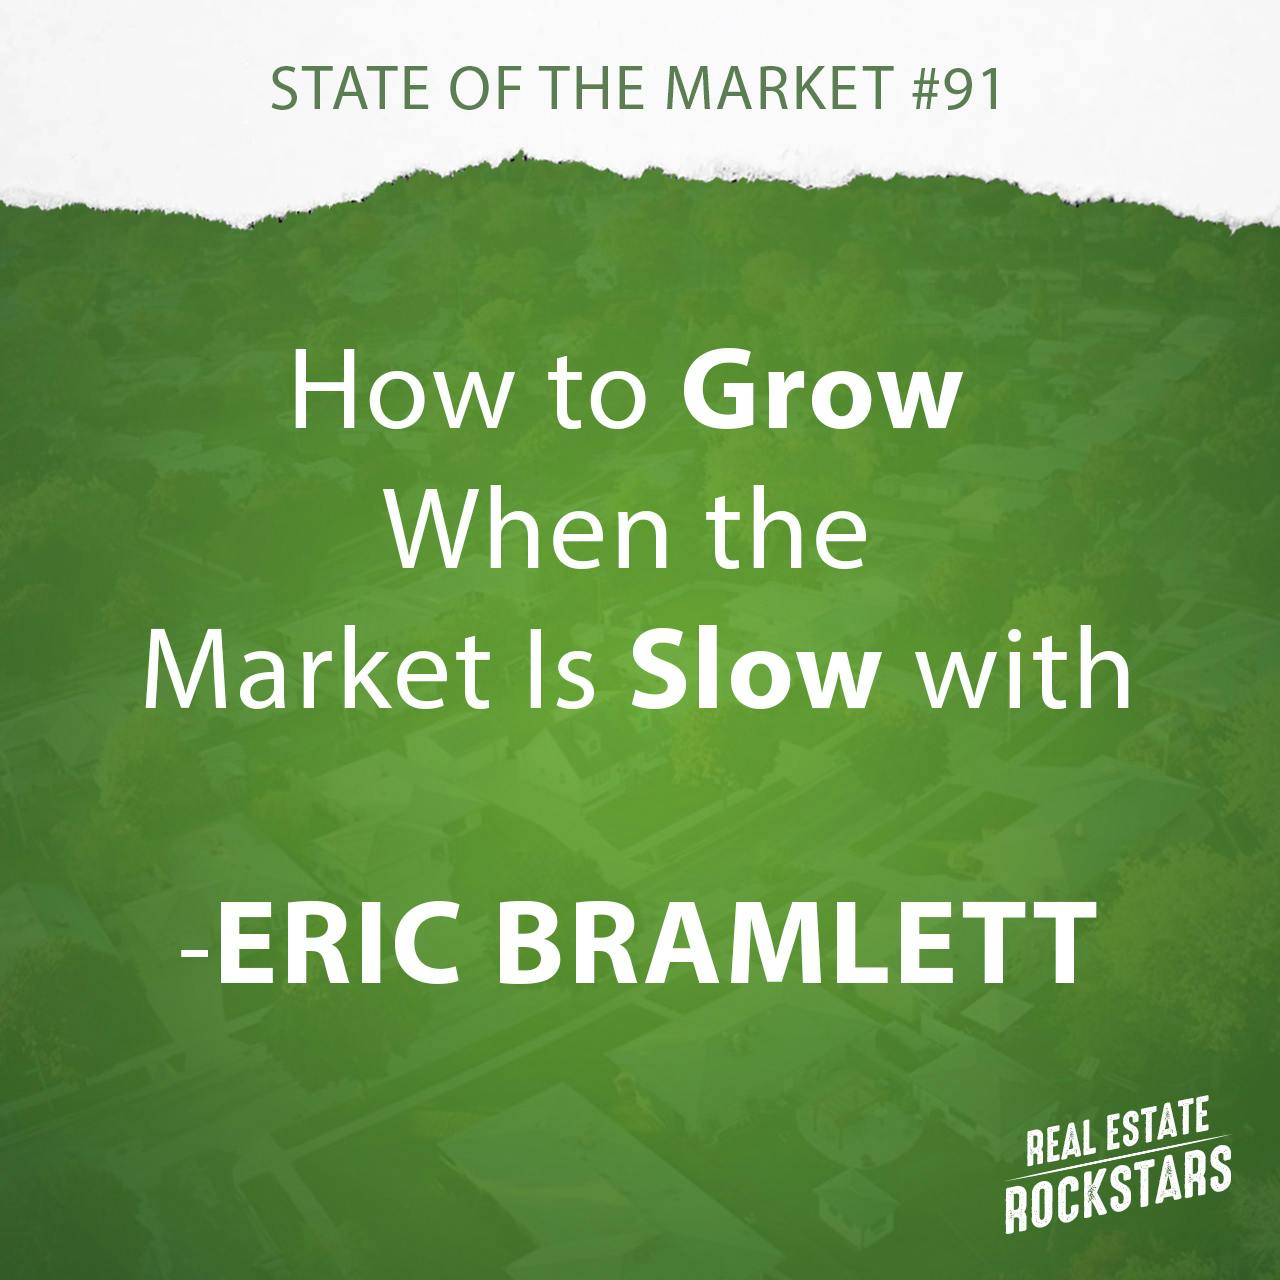 SOTM 91: How to Grow When the Market Is Slow With Eric Bramlett